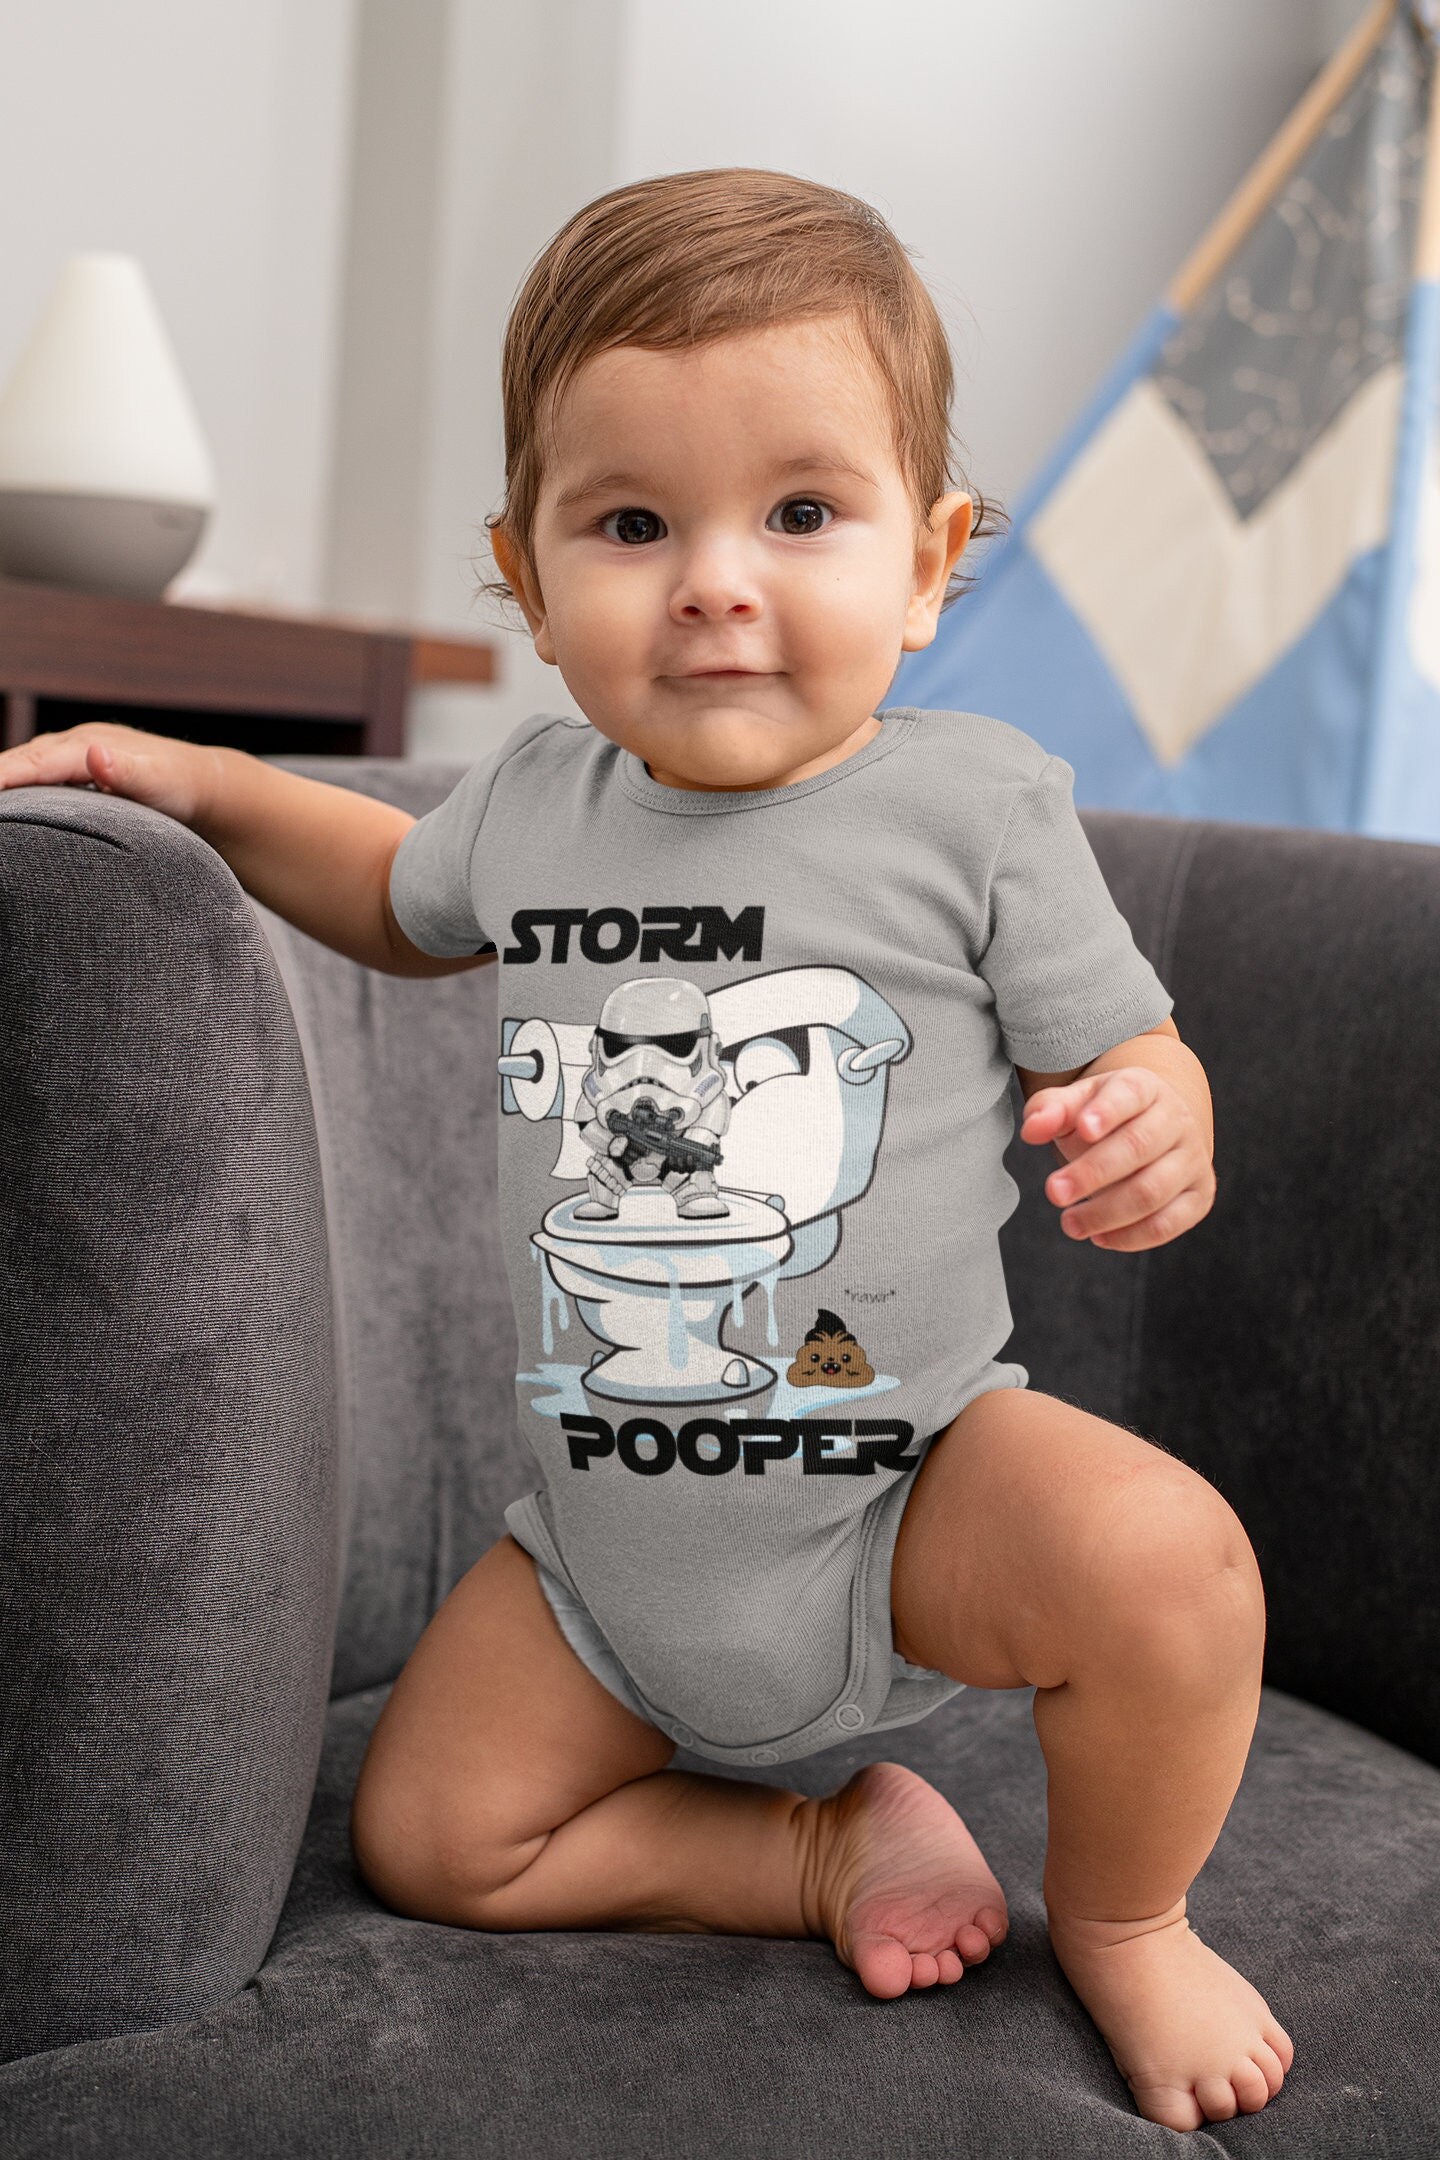 Star Wars Onesie Baby Clothes Funny Storm Pooper - Etsy